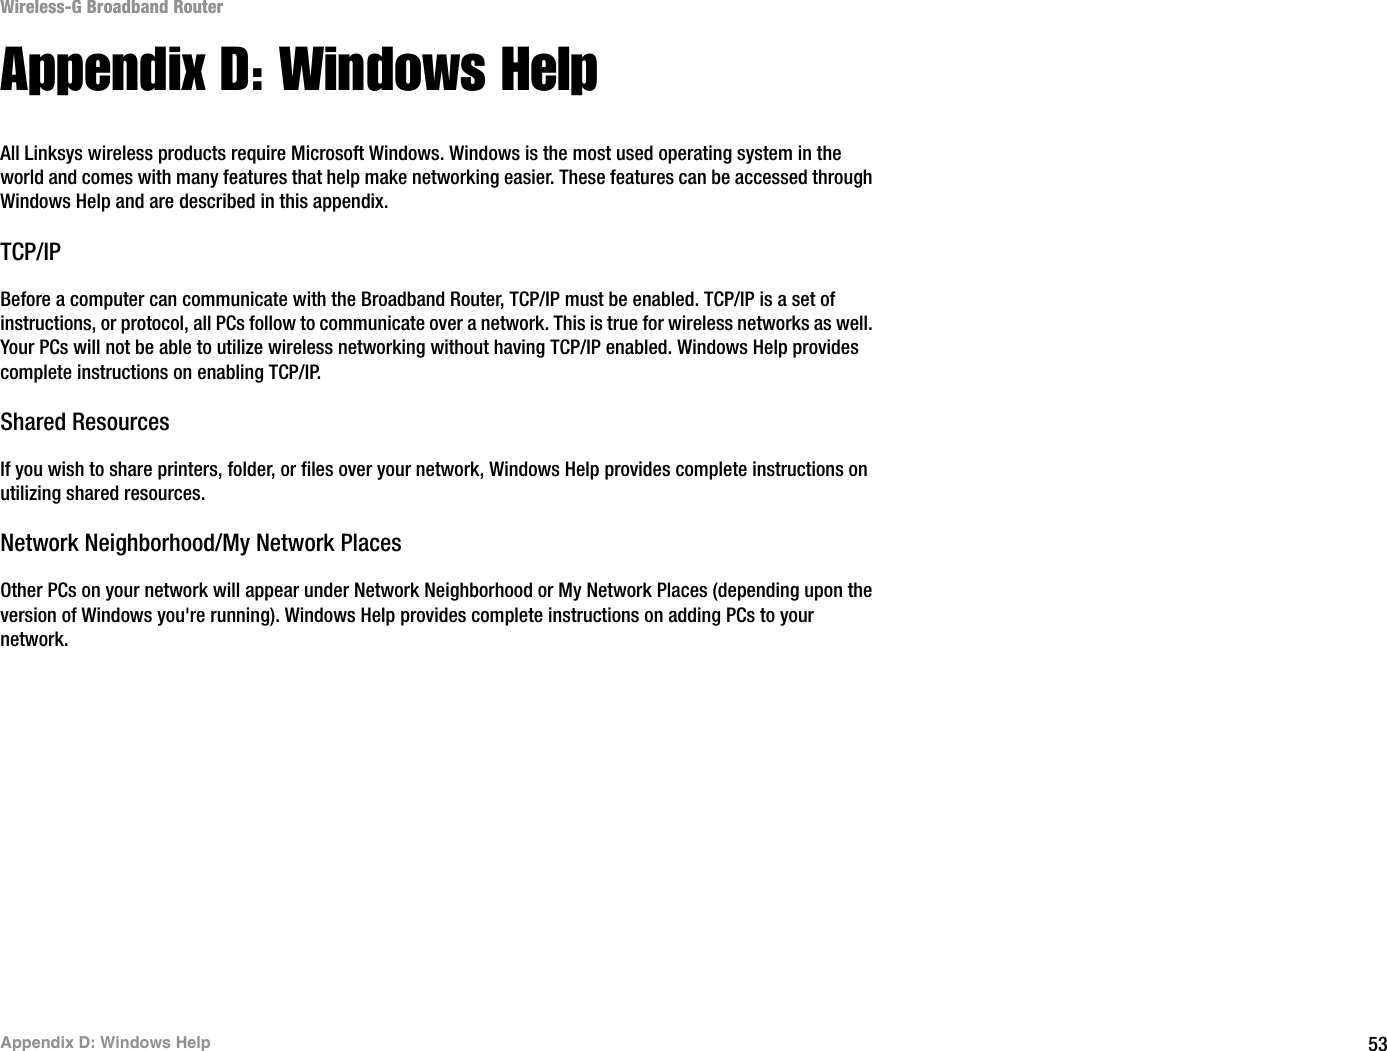 53Appendix D: Windows HelpWireless-G Broadband RouterAppendix D: Windows HelpAll Linksys wireless products require Microsoft Windows. Windows is the most used operating system in the world and comes with many features that help make networking easier. These features can be accessed through Windows Help and are described in this appendix.TCP/IPBefore a computer can communicate with the Broadband Router, TCP/IP must be enabled. TCP/IP is a set of instructions, or protocol, all PCs follow to communicate over a network. This is true for wireless networks as well. Your PCs will not be able to utilize wireless networking without having TCP/IP enabled. Windows Help provides complete instructions on enabling TCP/IP.Shared ResourcesIf you wish to share printers, folder, or files over your network, Windows Help provides complete instructions on utilizing shared resources.Network Neighborhood/My Network PlacesOther PCs on your network will appear under Network Neighborhood or My Network Places (depending upon the version of Windows you&apos;re running). Windows Help provides complete instructions on adding PCs to your network.